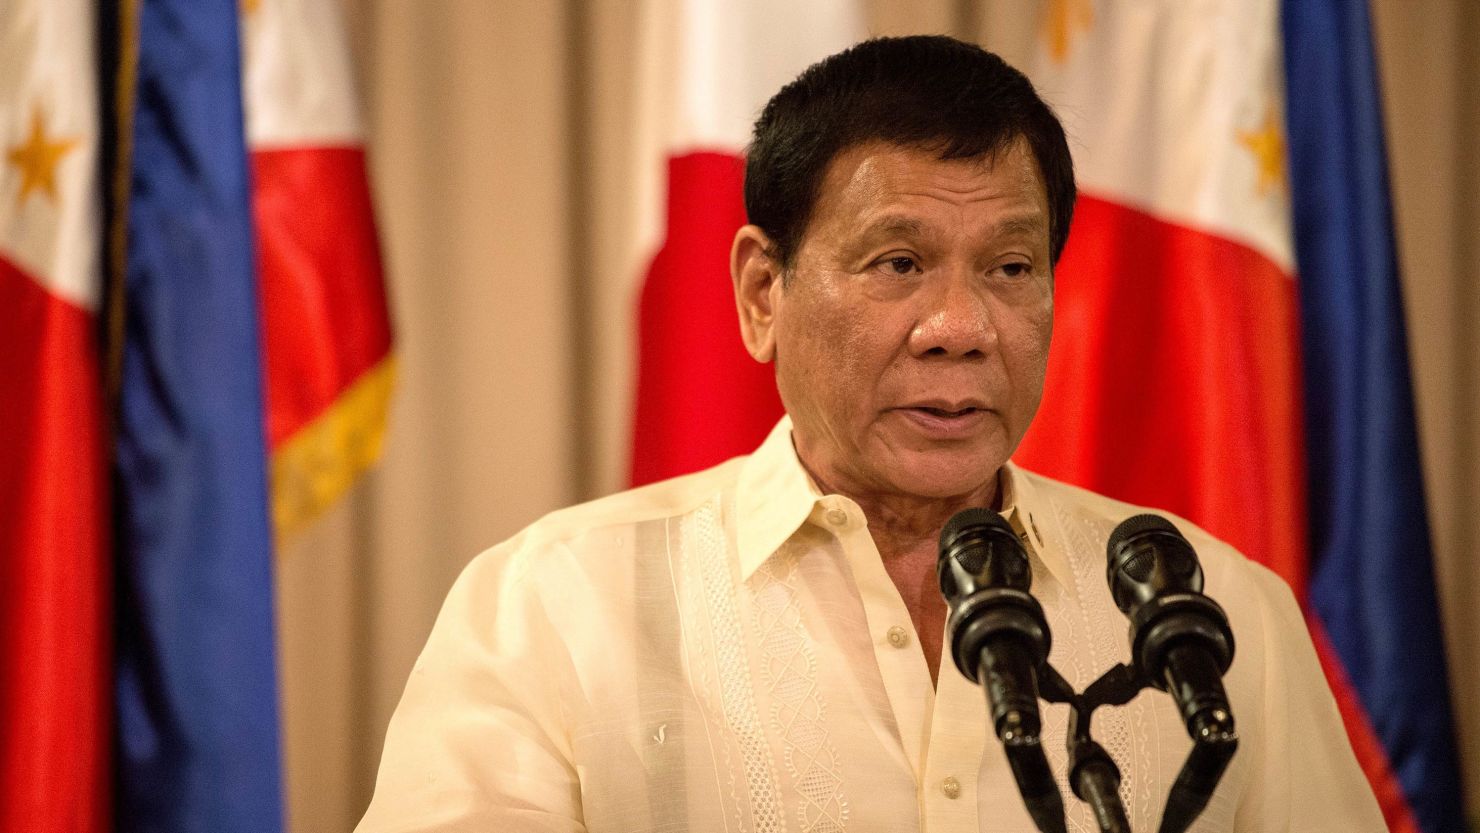 Philippine President Rodrigo Duterte at a news conference at the Malacanang Palace in Manila on January 12, 2017.